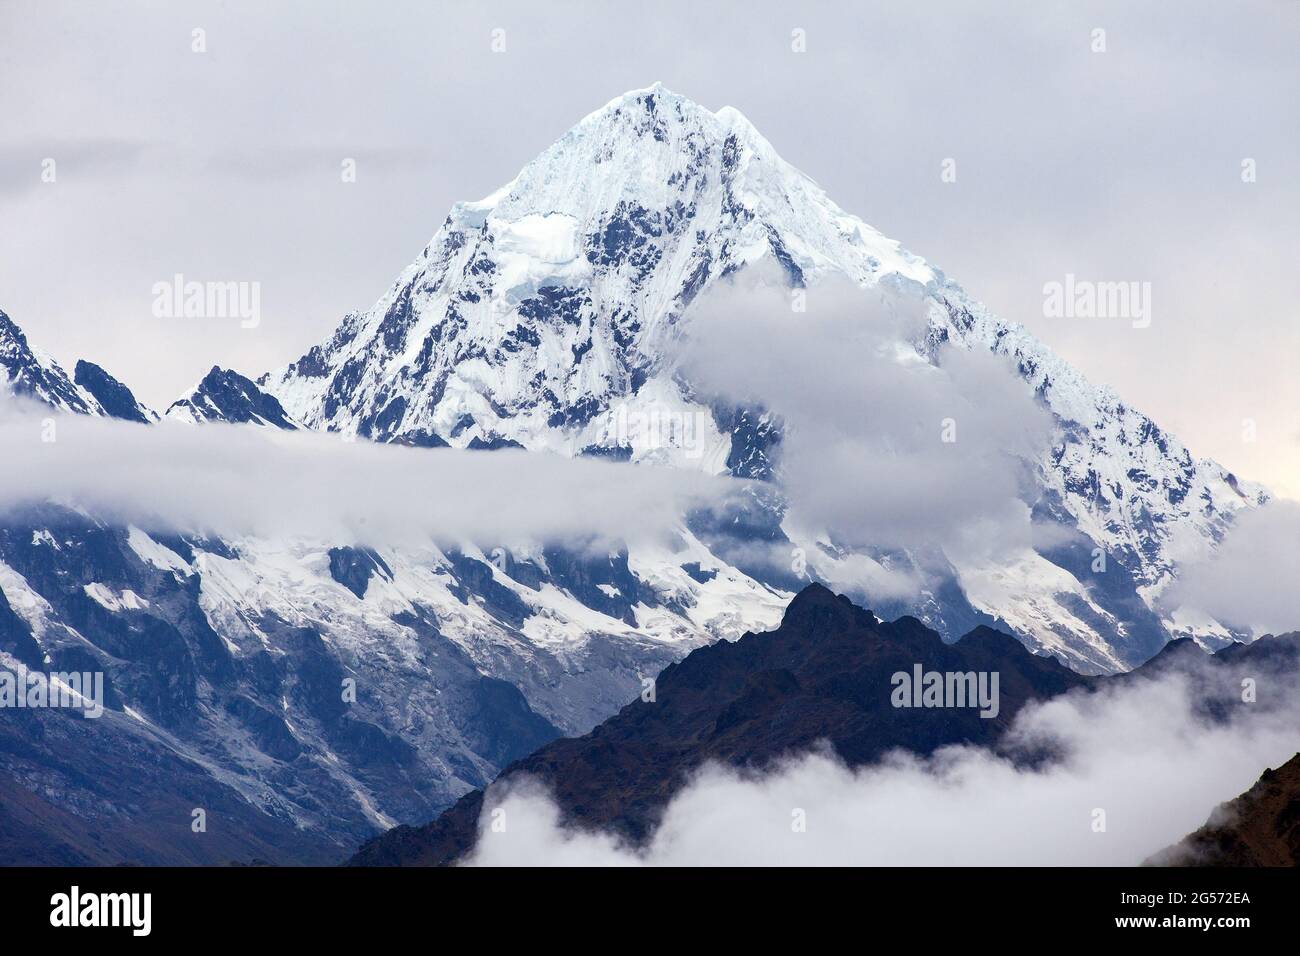 Mount Salkantay in the middle of clouds, view from Choquequirao trekking trail, Cuzco area, Machu Picchu area, Peruvian Andes Stock Photo